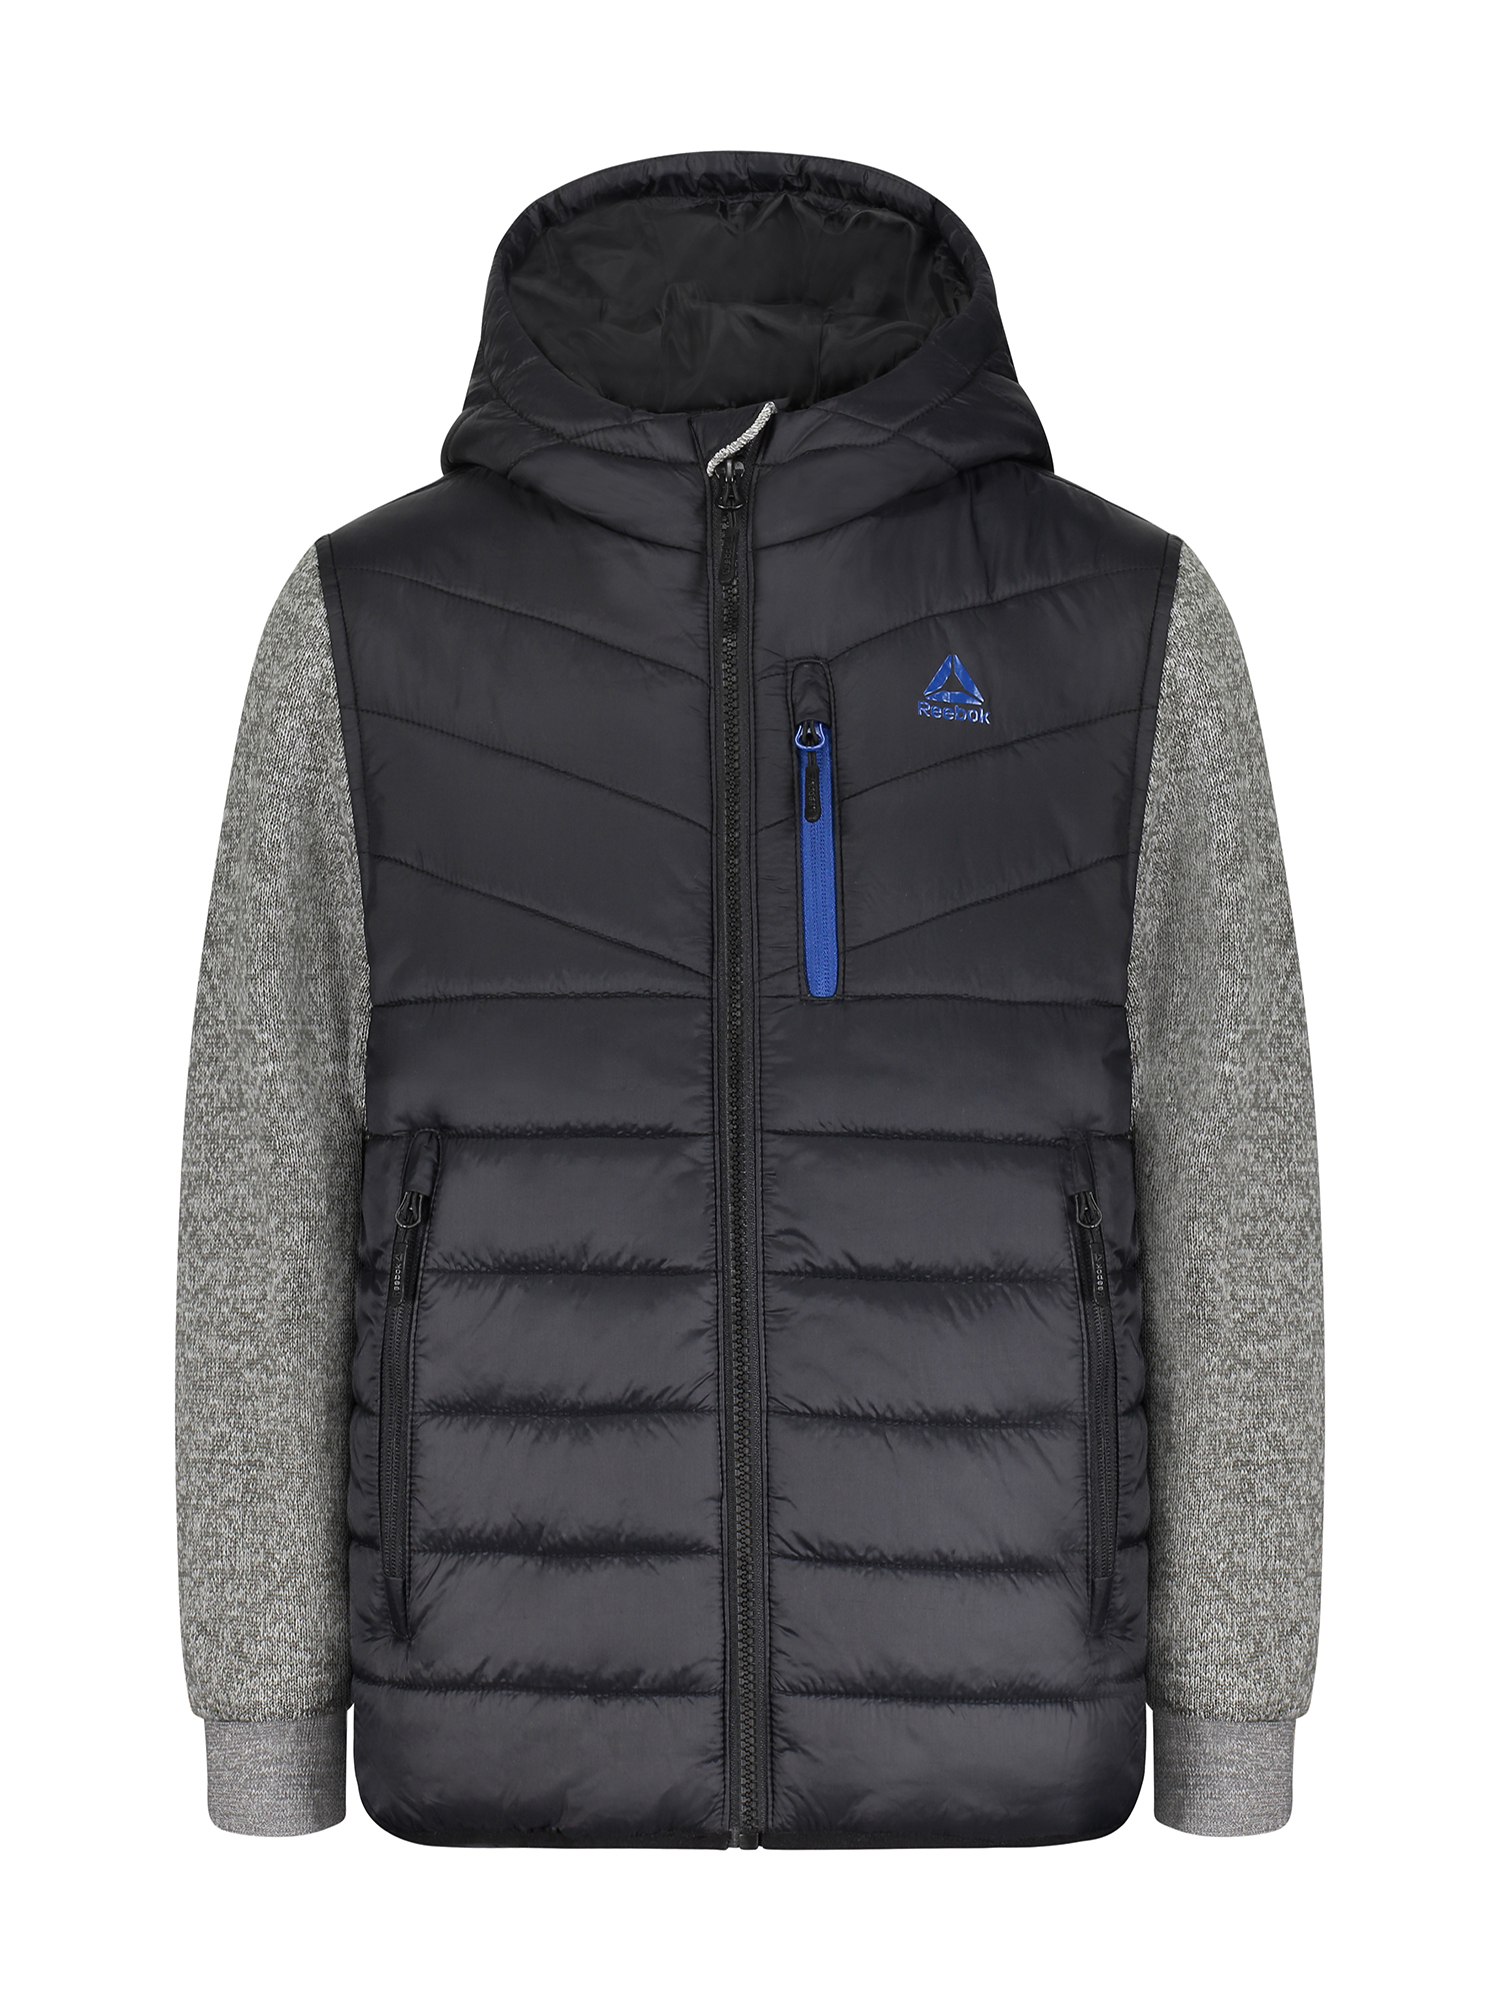 Reebok Boys Puffer Vest with Sleeves, Sizes 4-20 - image 1 of 2